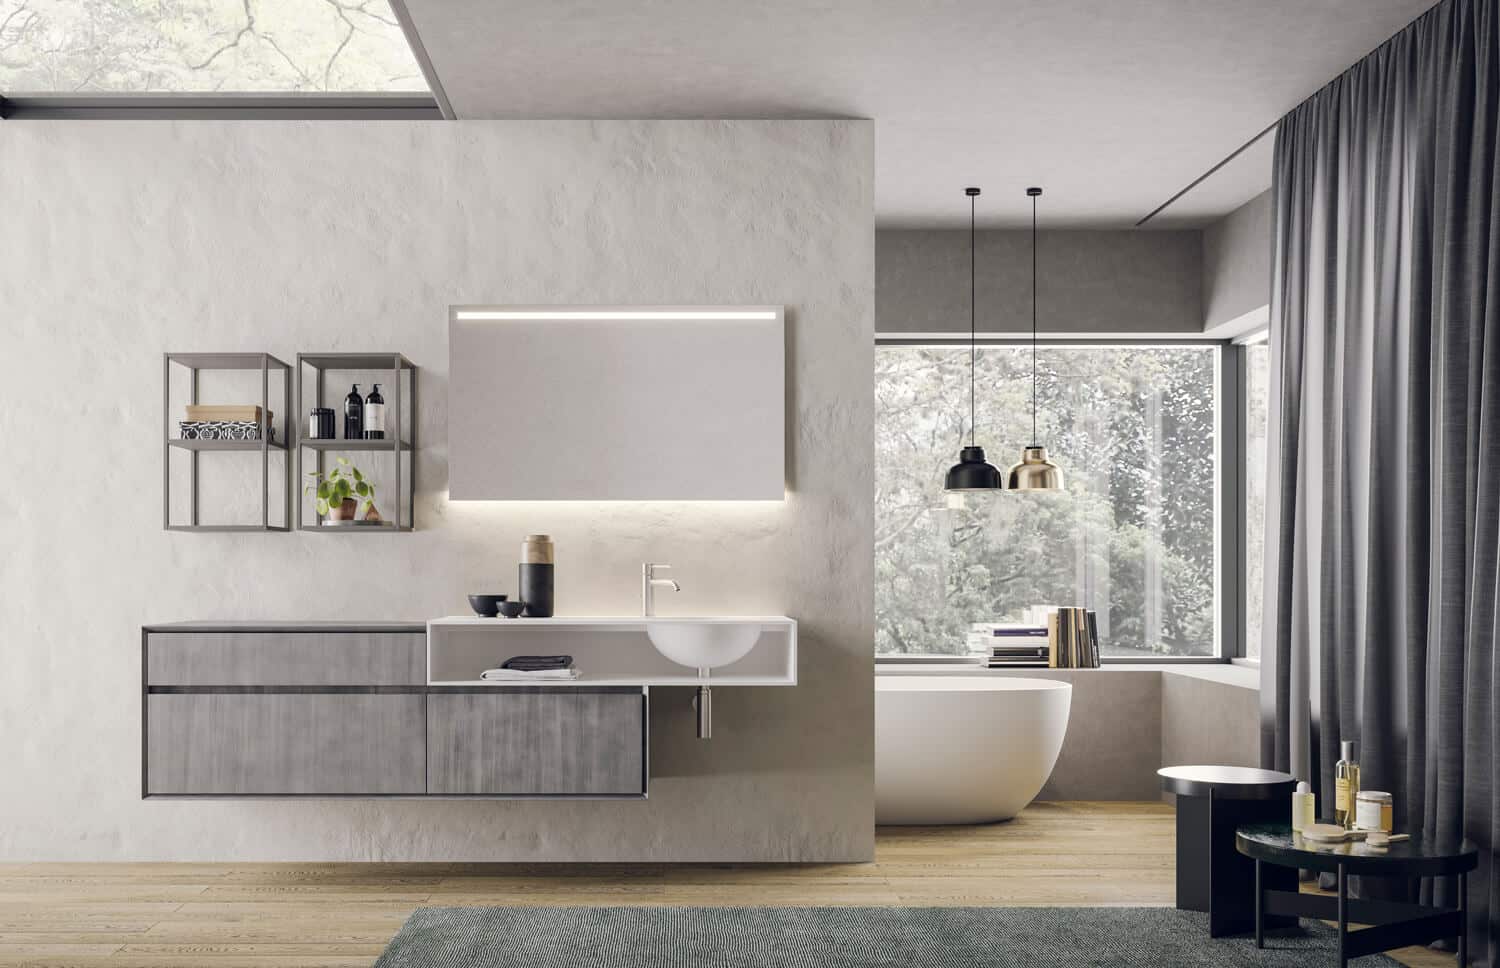 Cabinets in Acciaio metal. Open shelving units: Tortora matte lacquered metal. Washbasin and top: White matte teknorit.